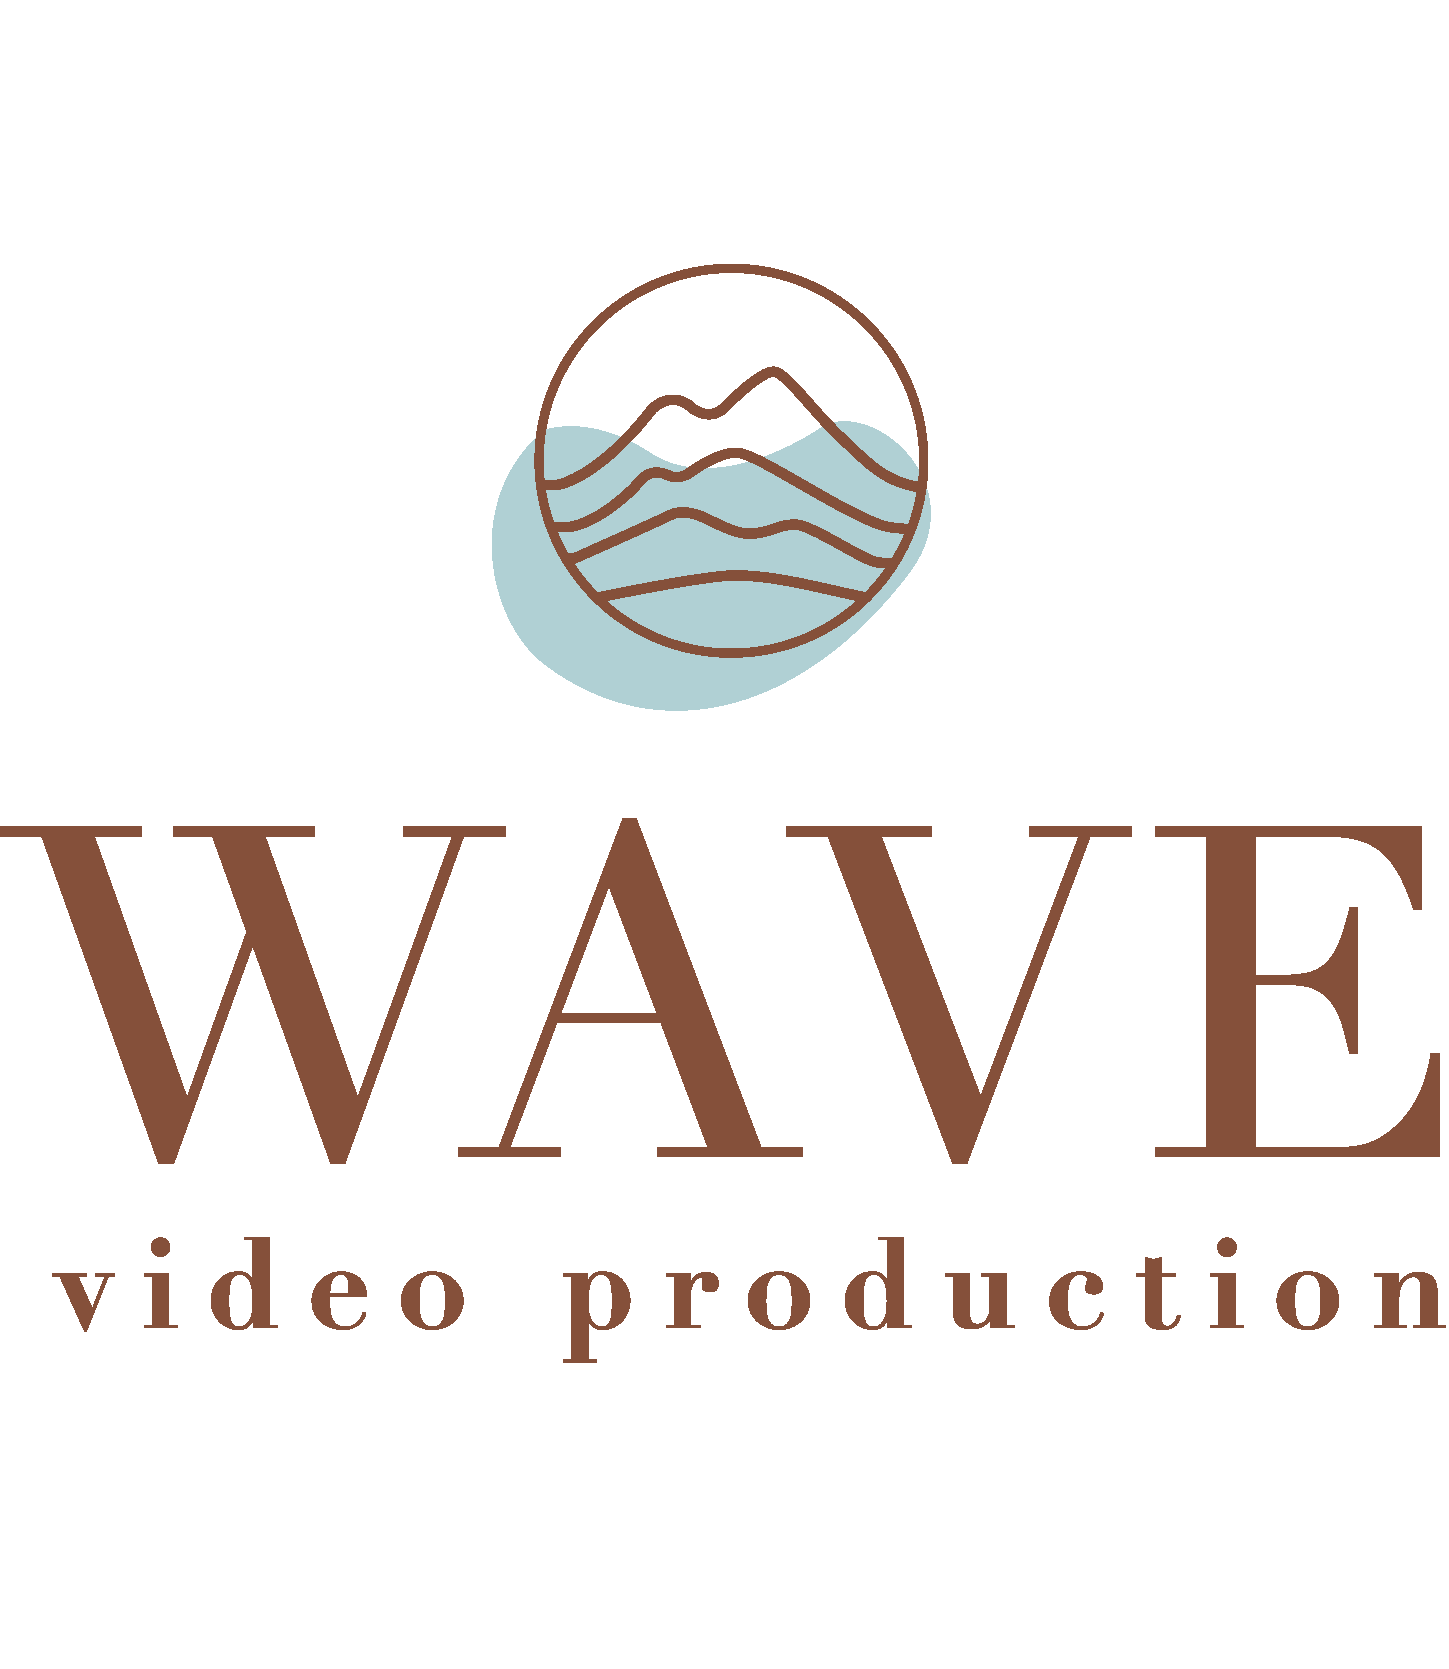 WAVE Video Production